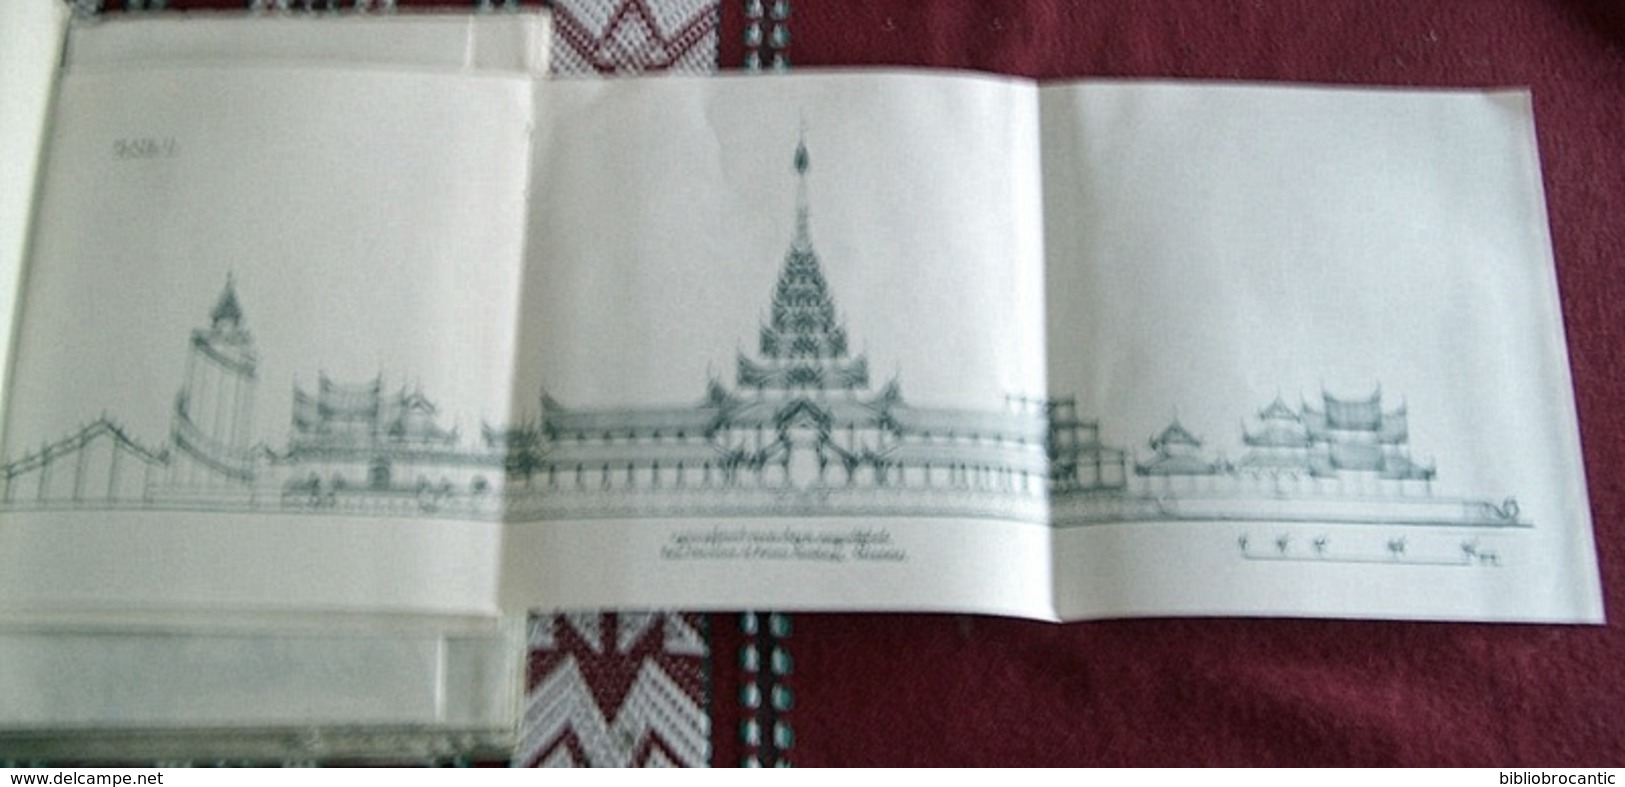 THE MANDALAY PALACE - A SUPERB GUIDE TO THE ARCHITECTURAL DETAILS OF THE PALACE